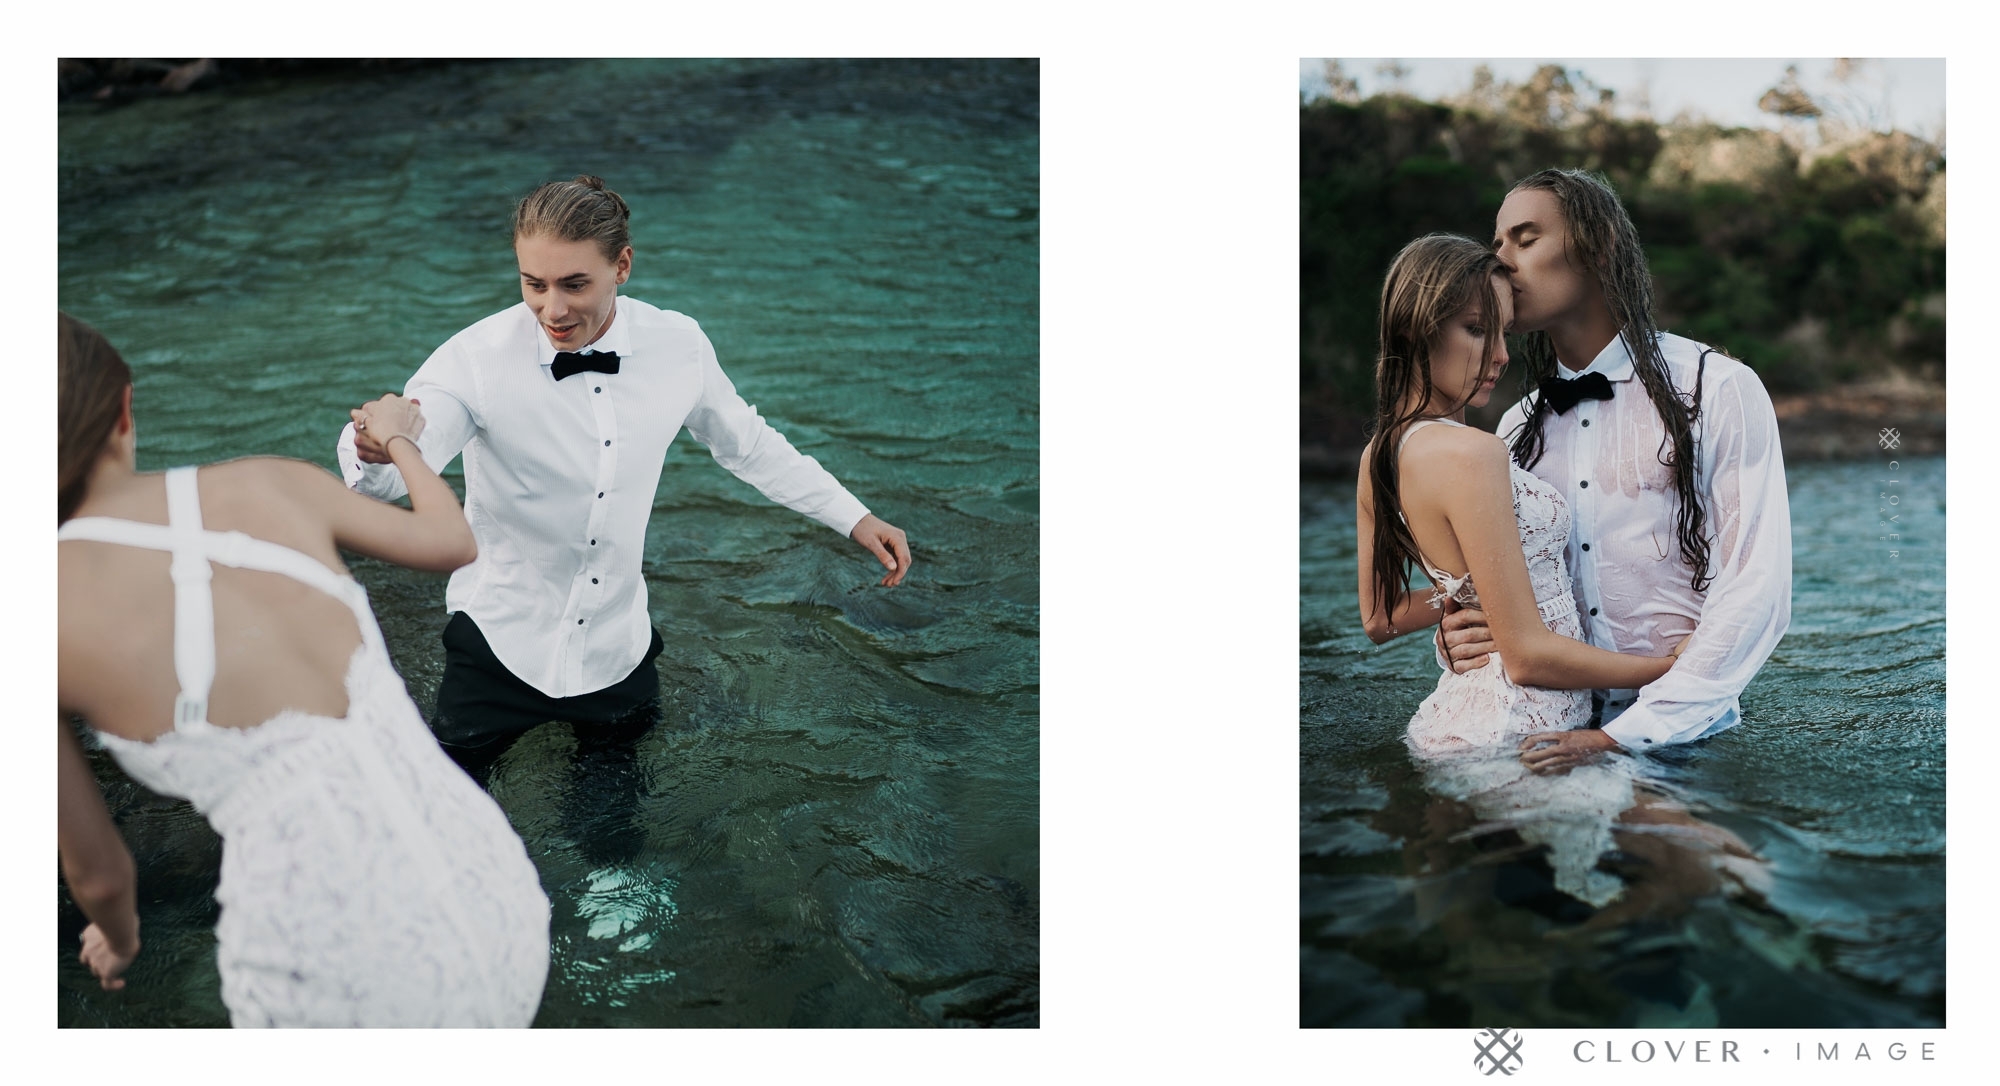 Clover Image Andy & Oliver Pre Wedding Photography Sydney 19